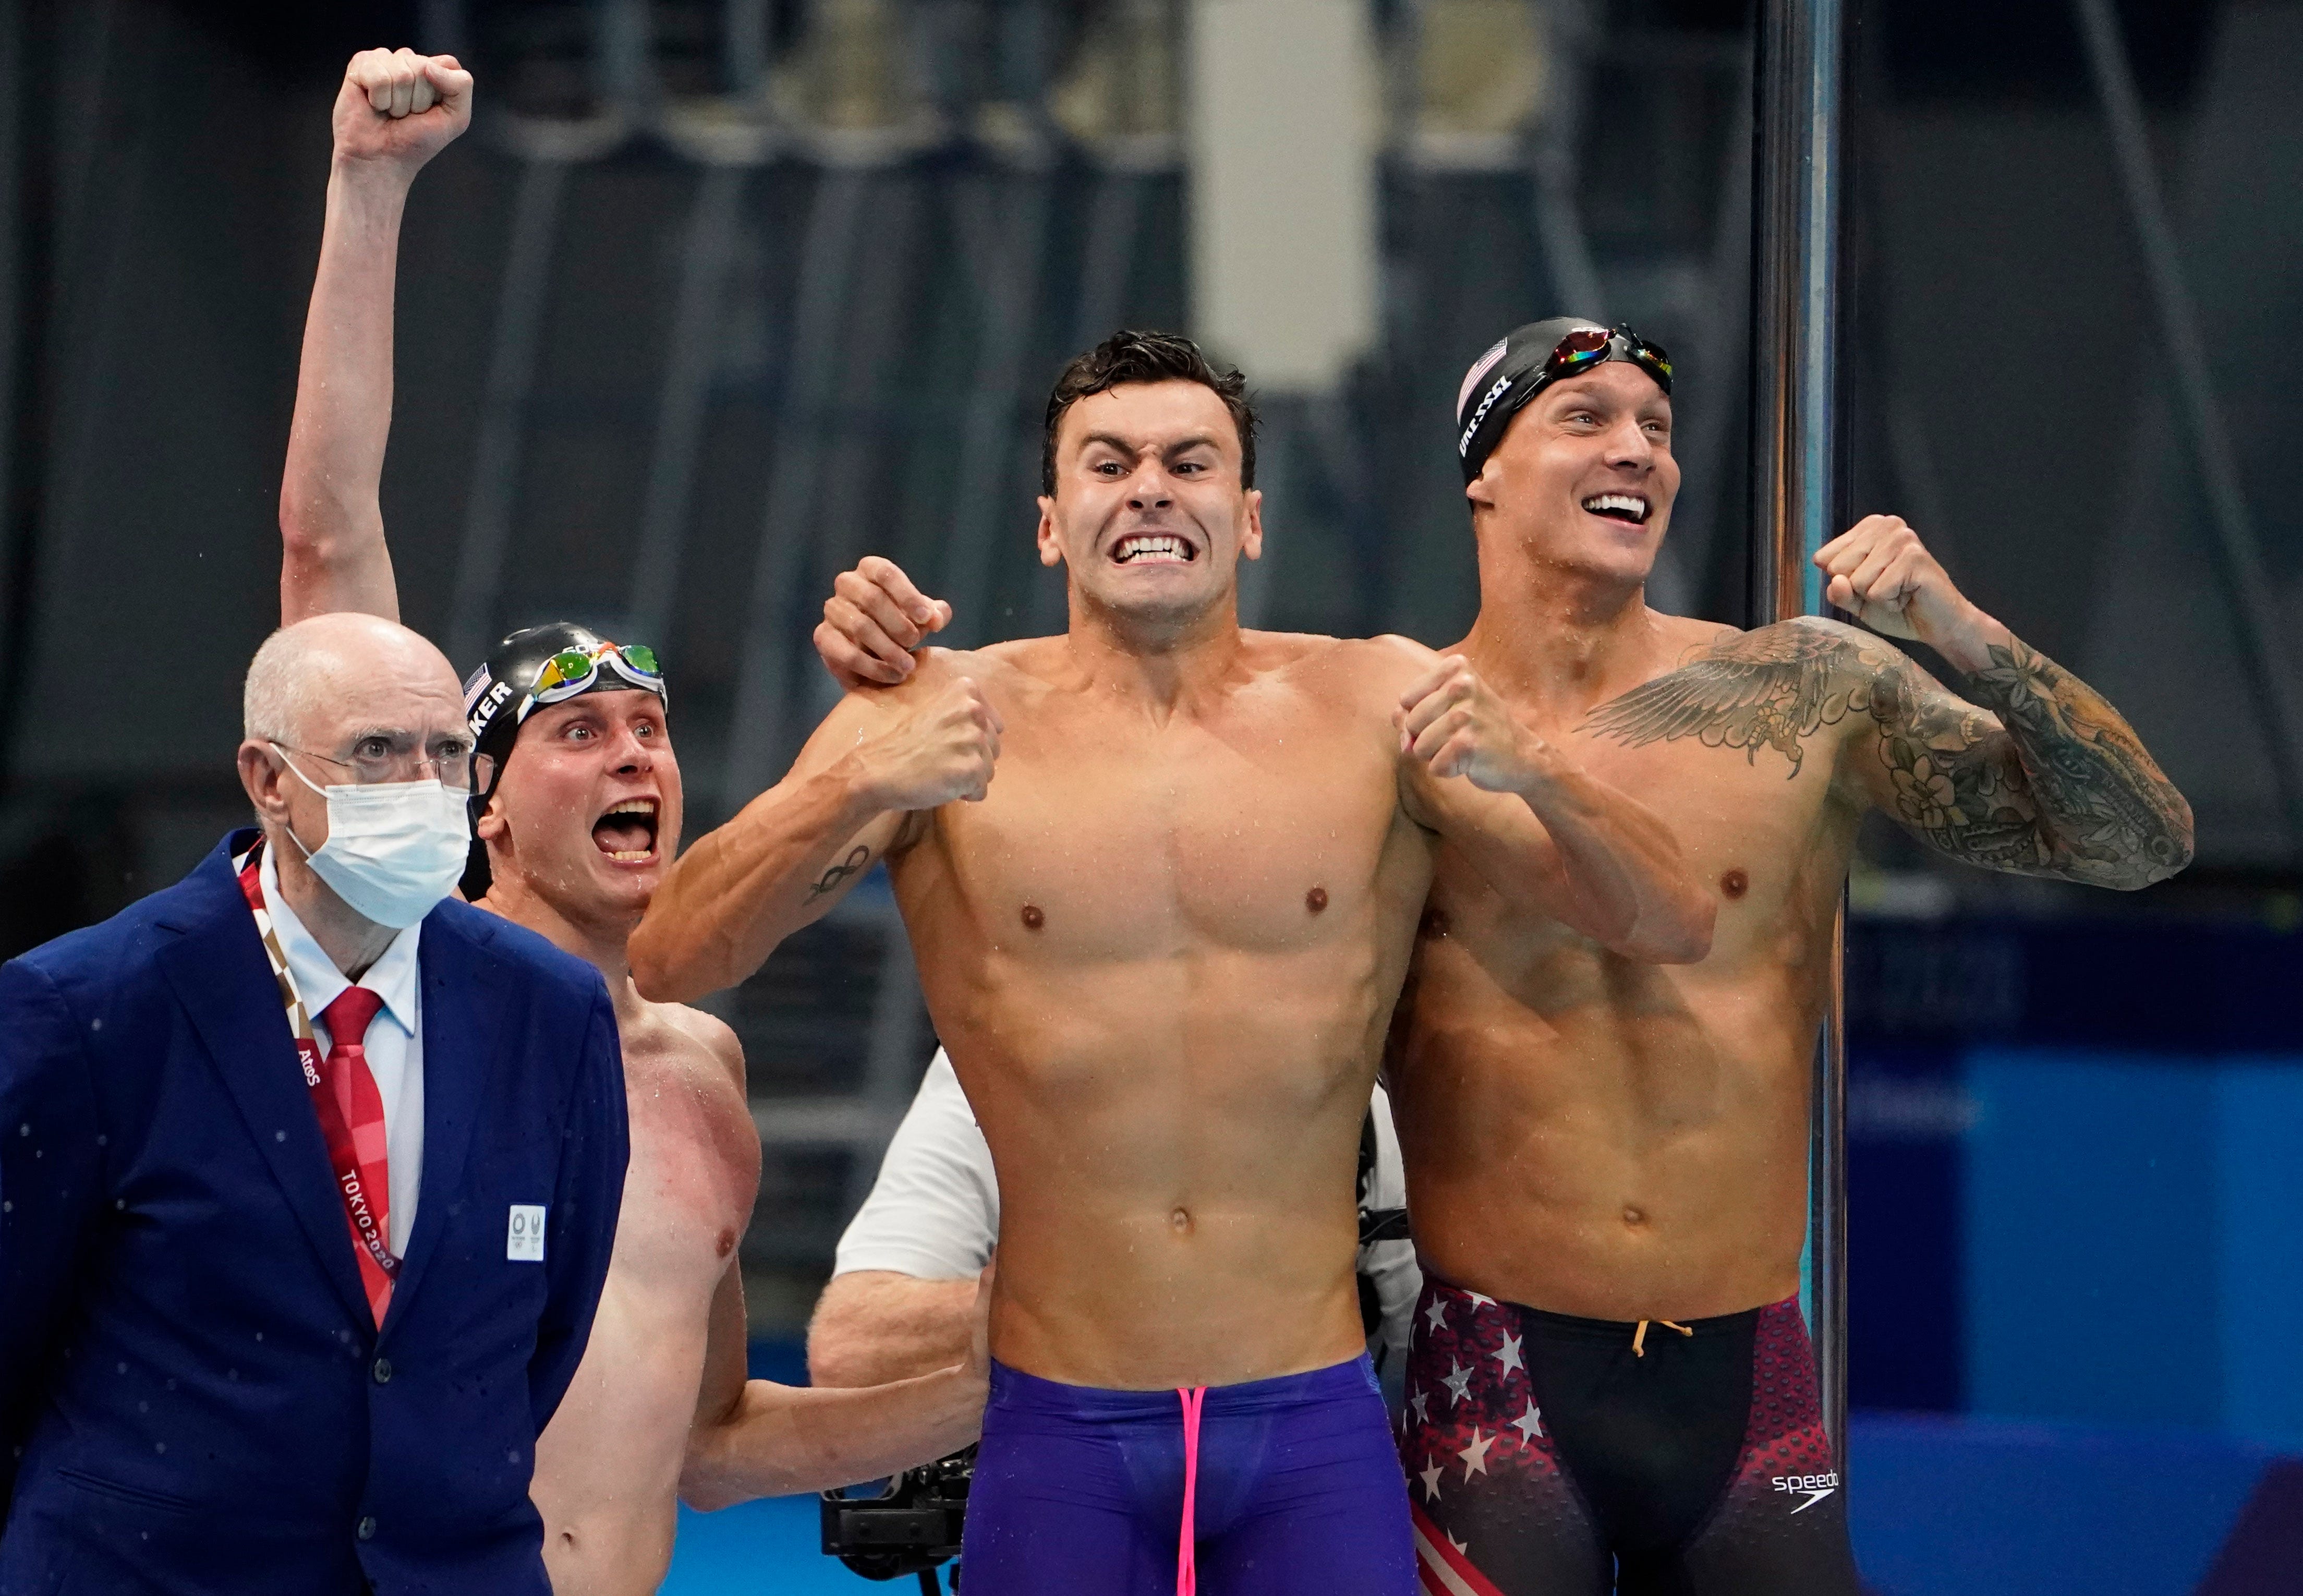 From left, Bowen Becker (USA), Blake Pieroni (USA) and Caeleb Dressel (USA) celebrate after winning the men's 4x100m freestyle relay final during the Tokyo 2020 Olympic Summer Games at Tokyo Aquatics Centre on July 26, 2021.